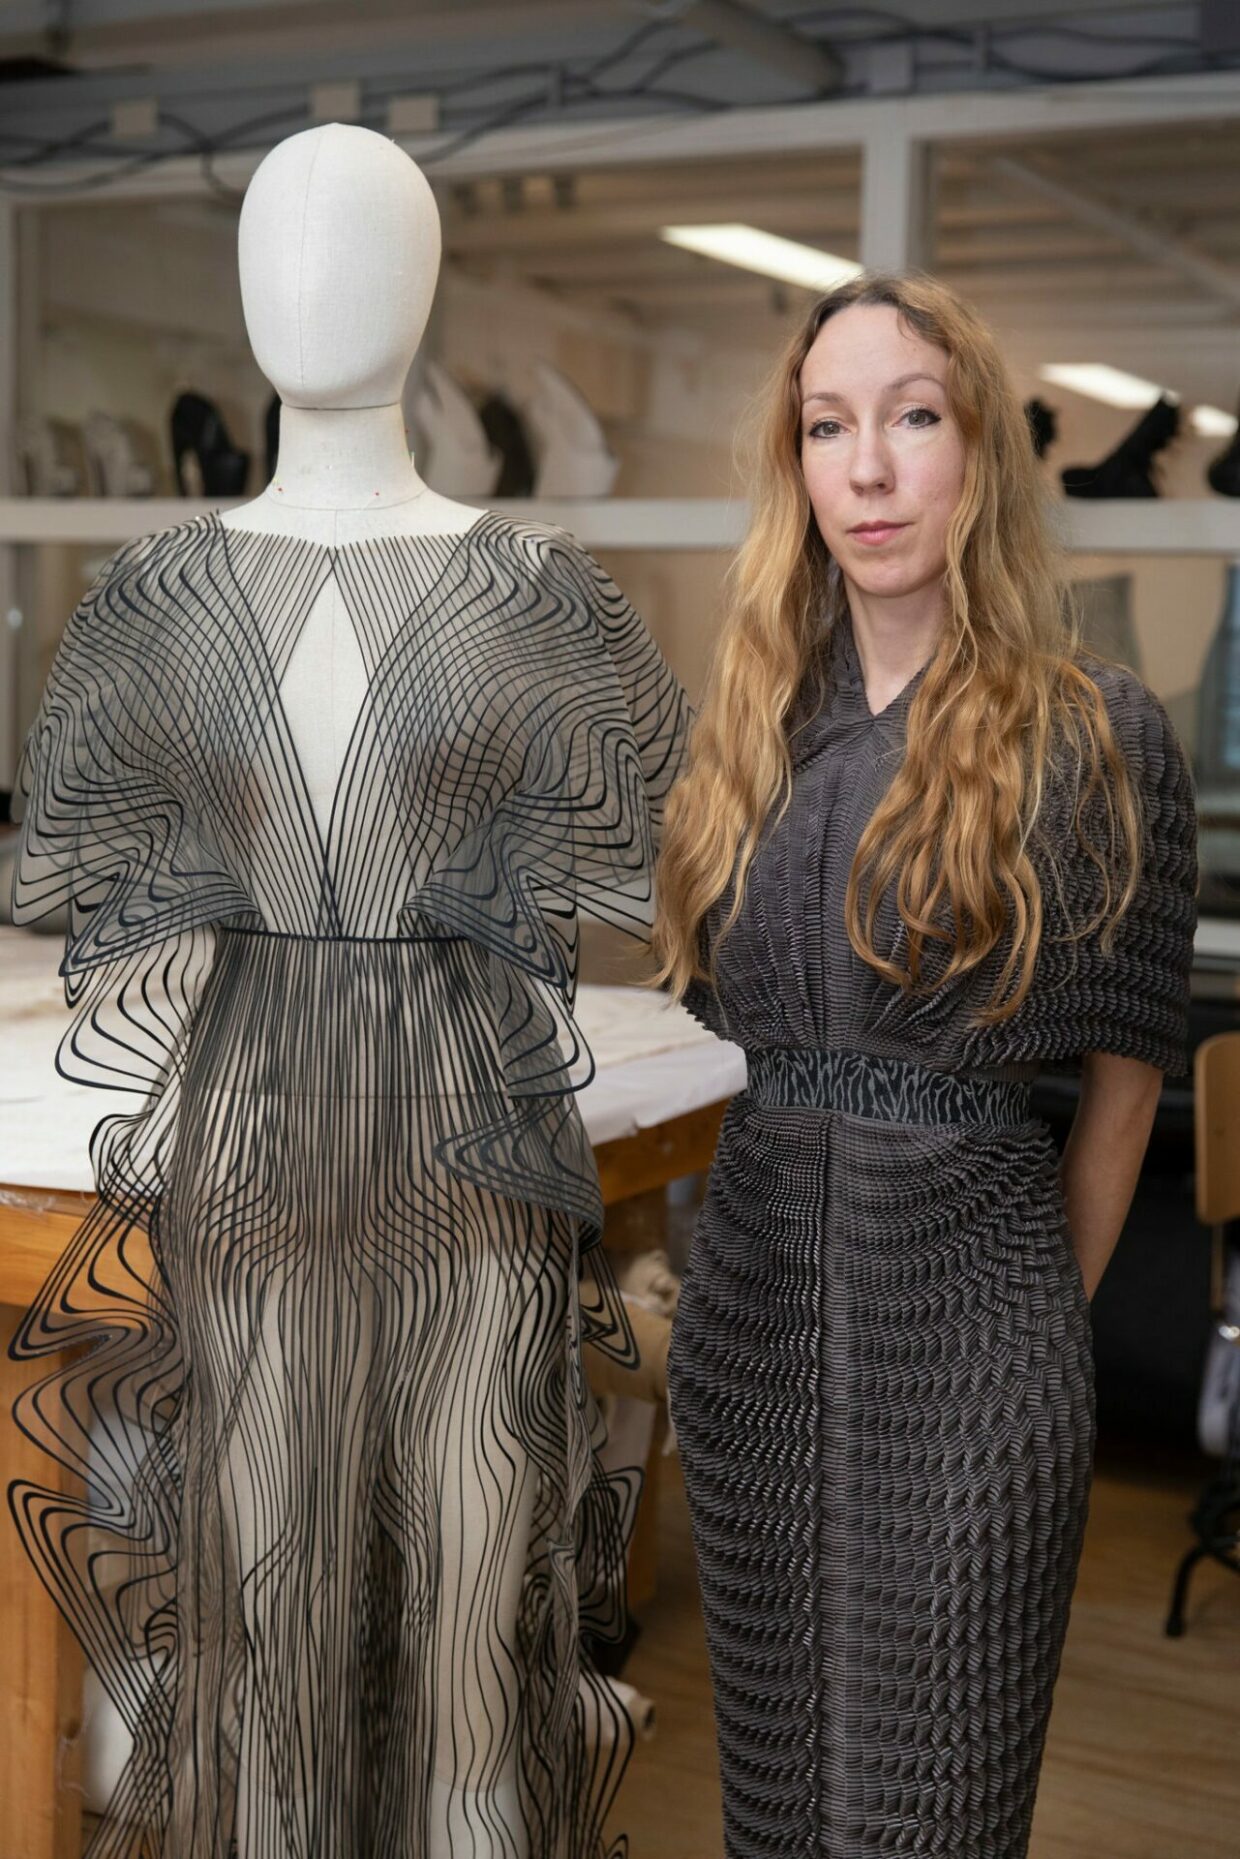 From a Sewing Needle to a Laser Cutter, a New Approach to Fashion | 1